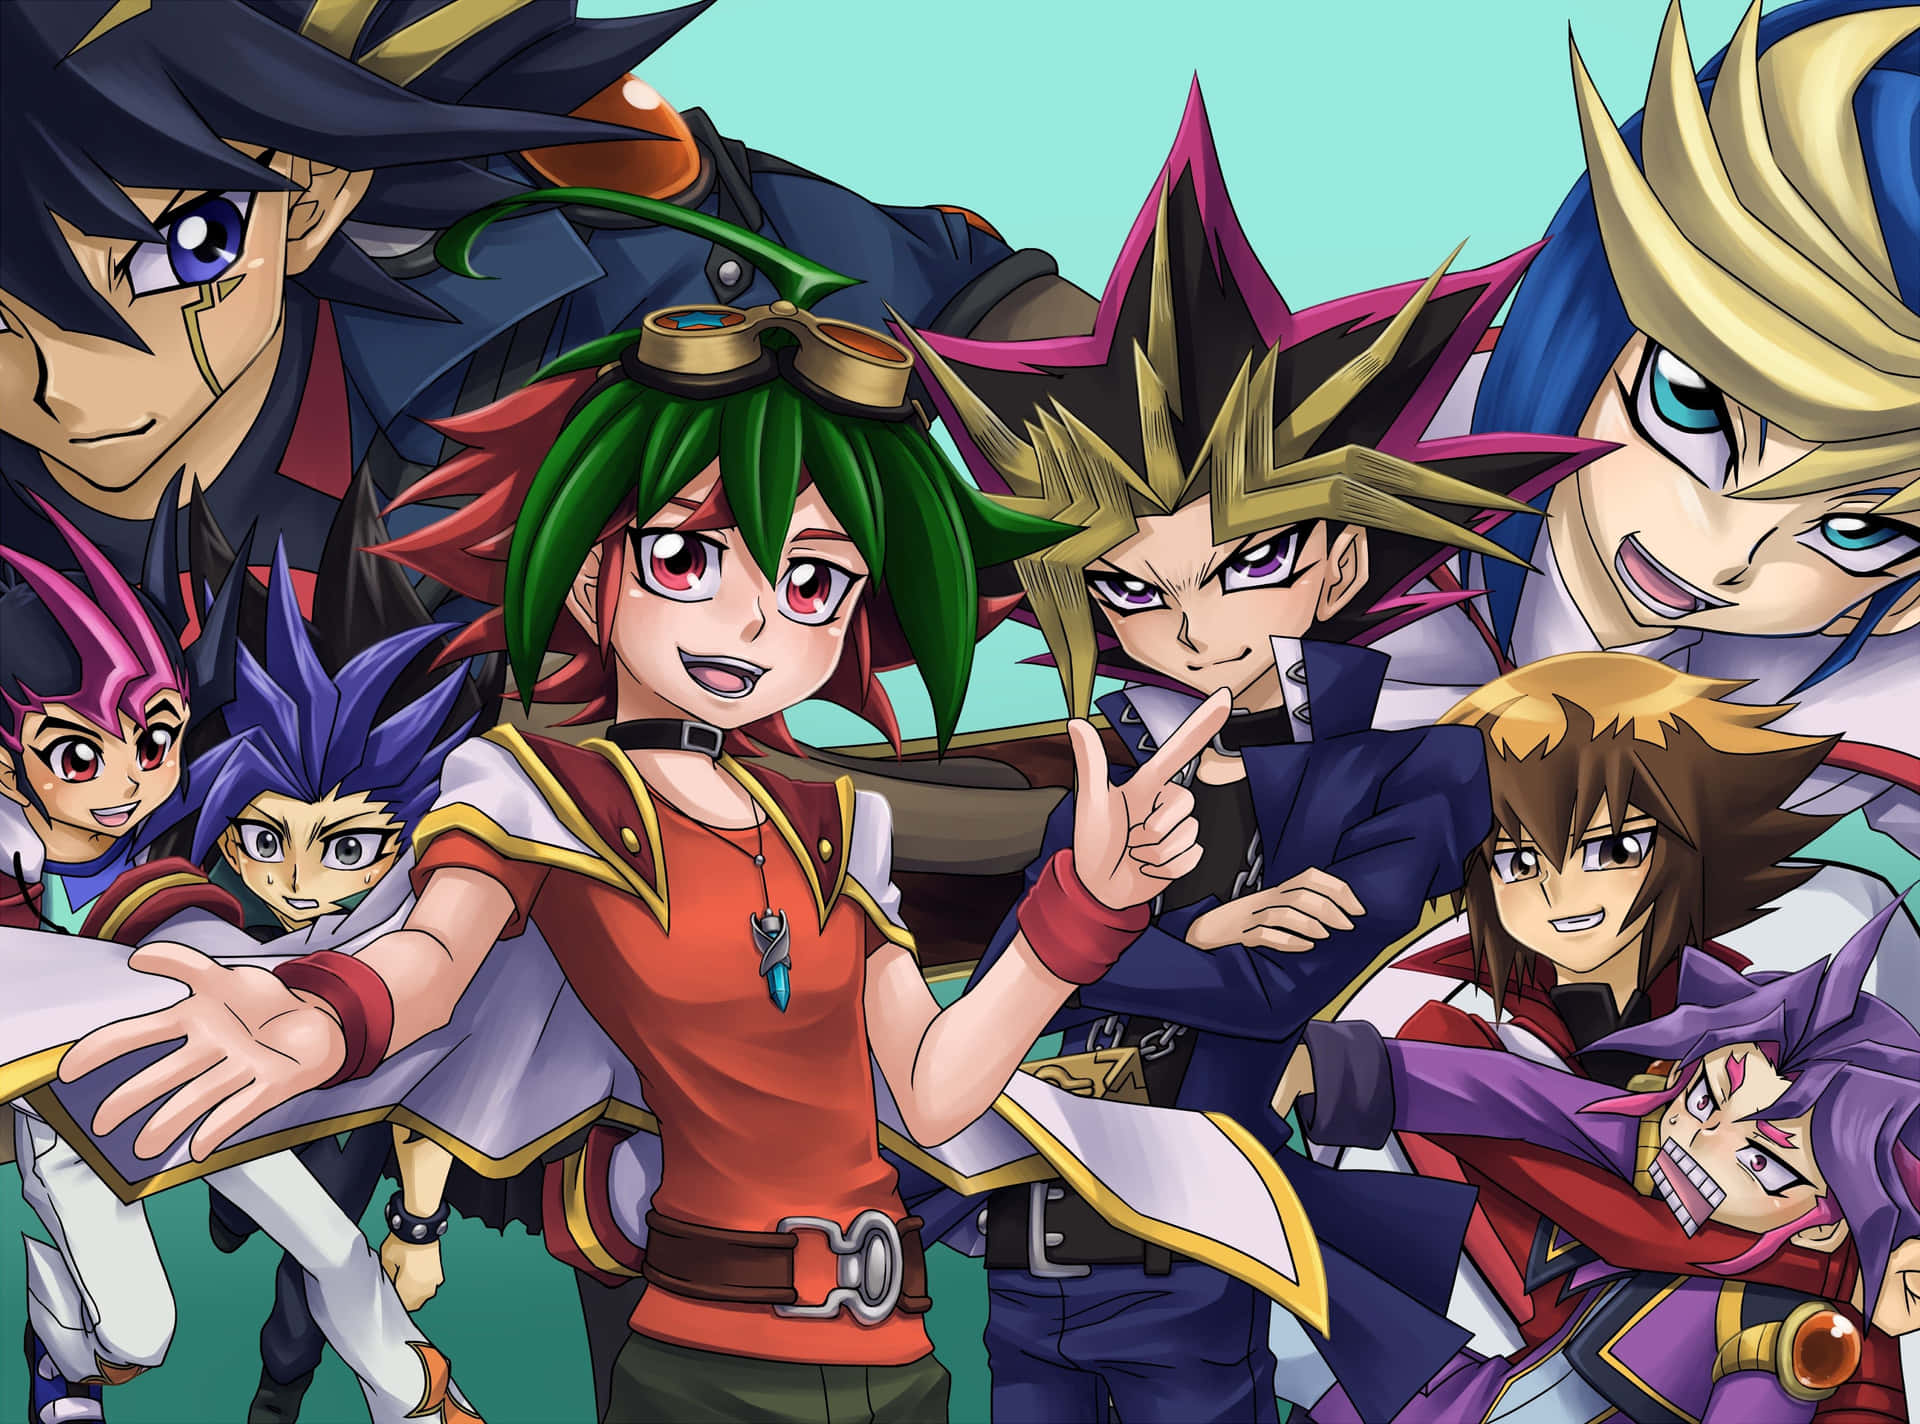 Yu-Gi-Oh! Yuto Dueling in Action Wallpaper